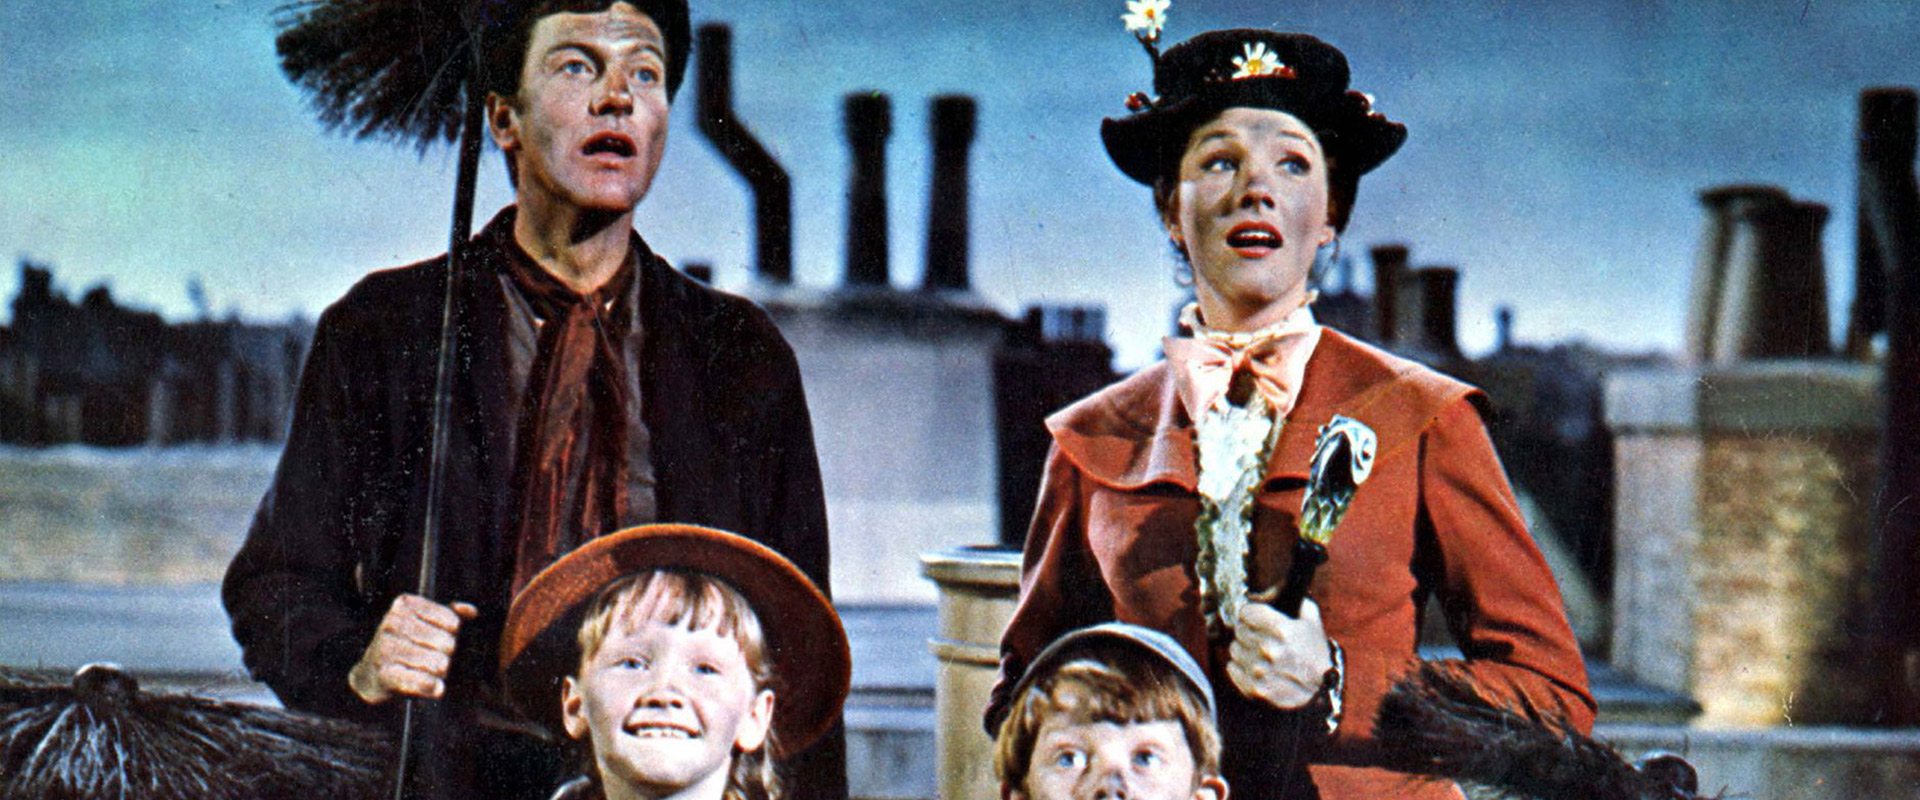 How old dick van dyke new mary poppins